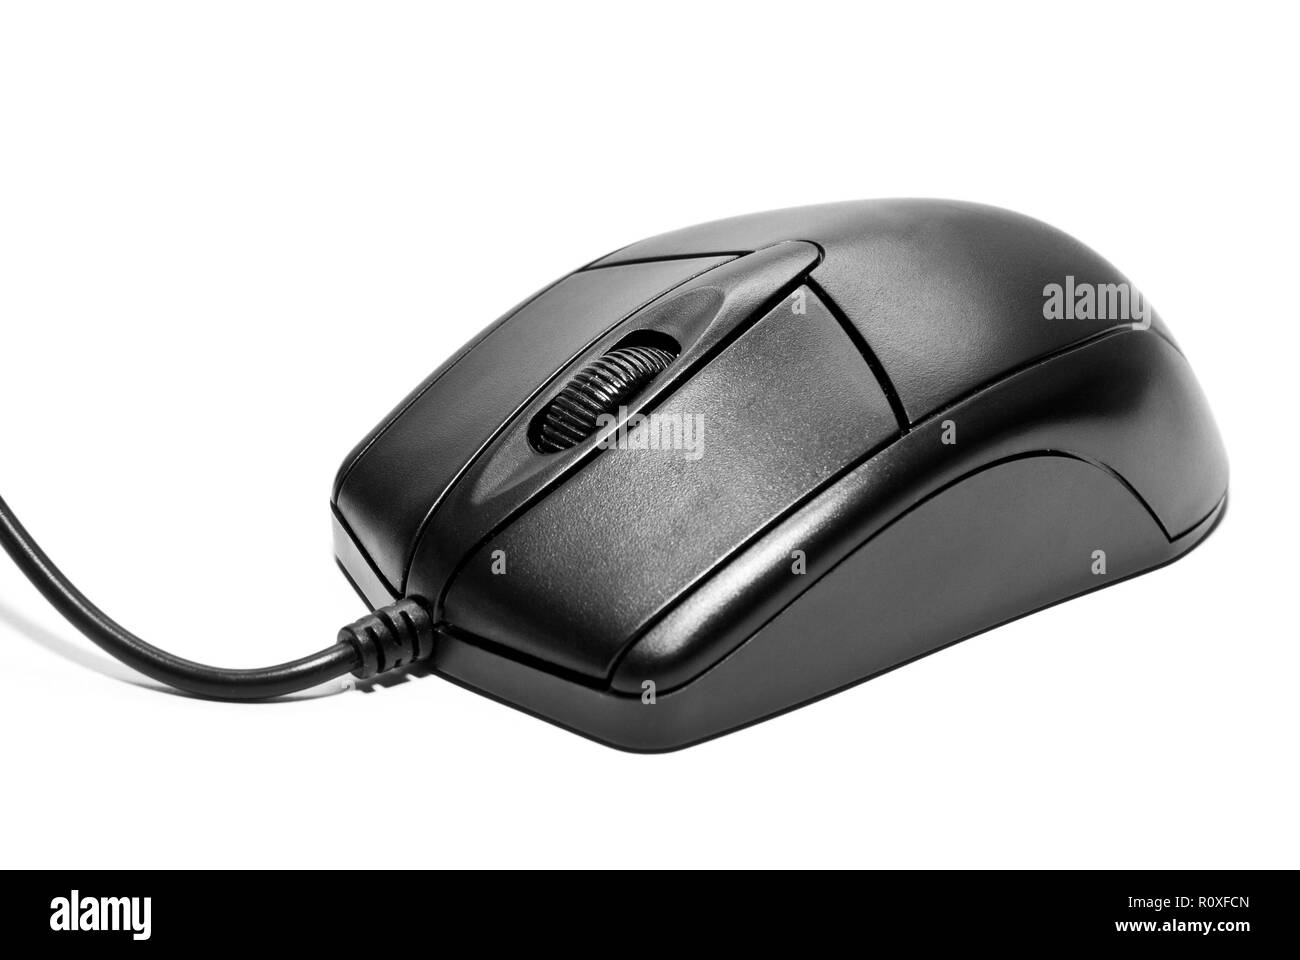 computer mouse isolated on a white background Stock Photo